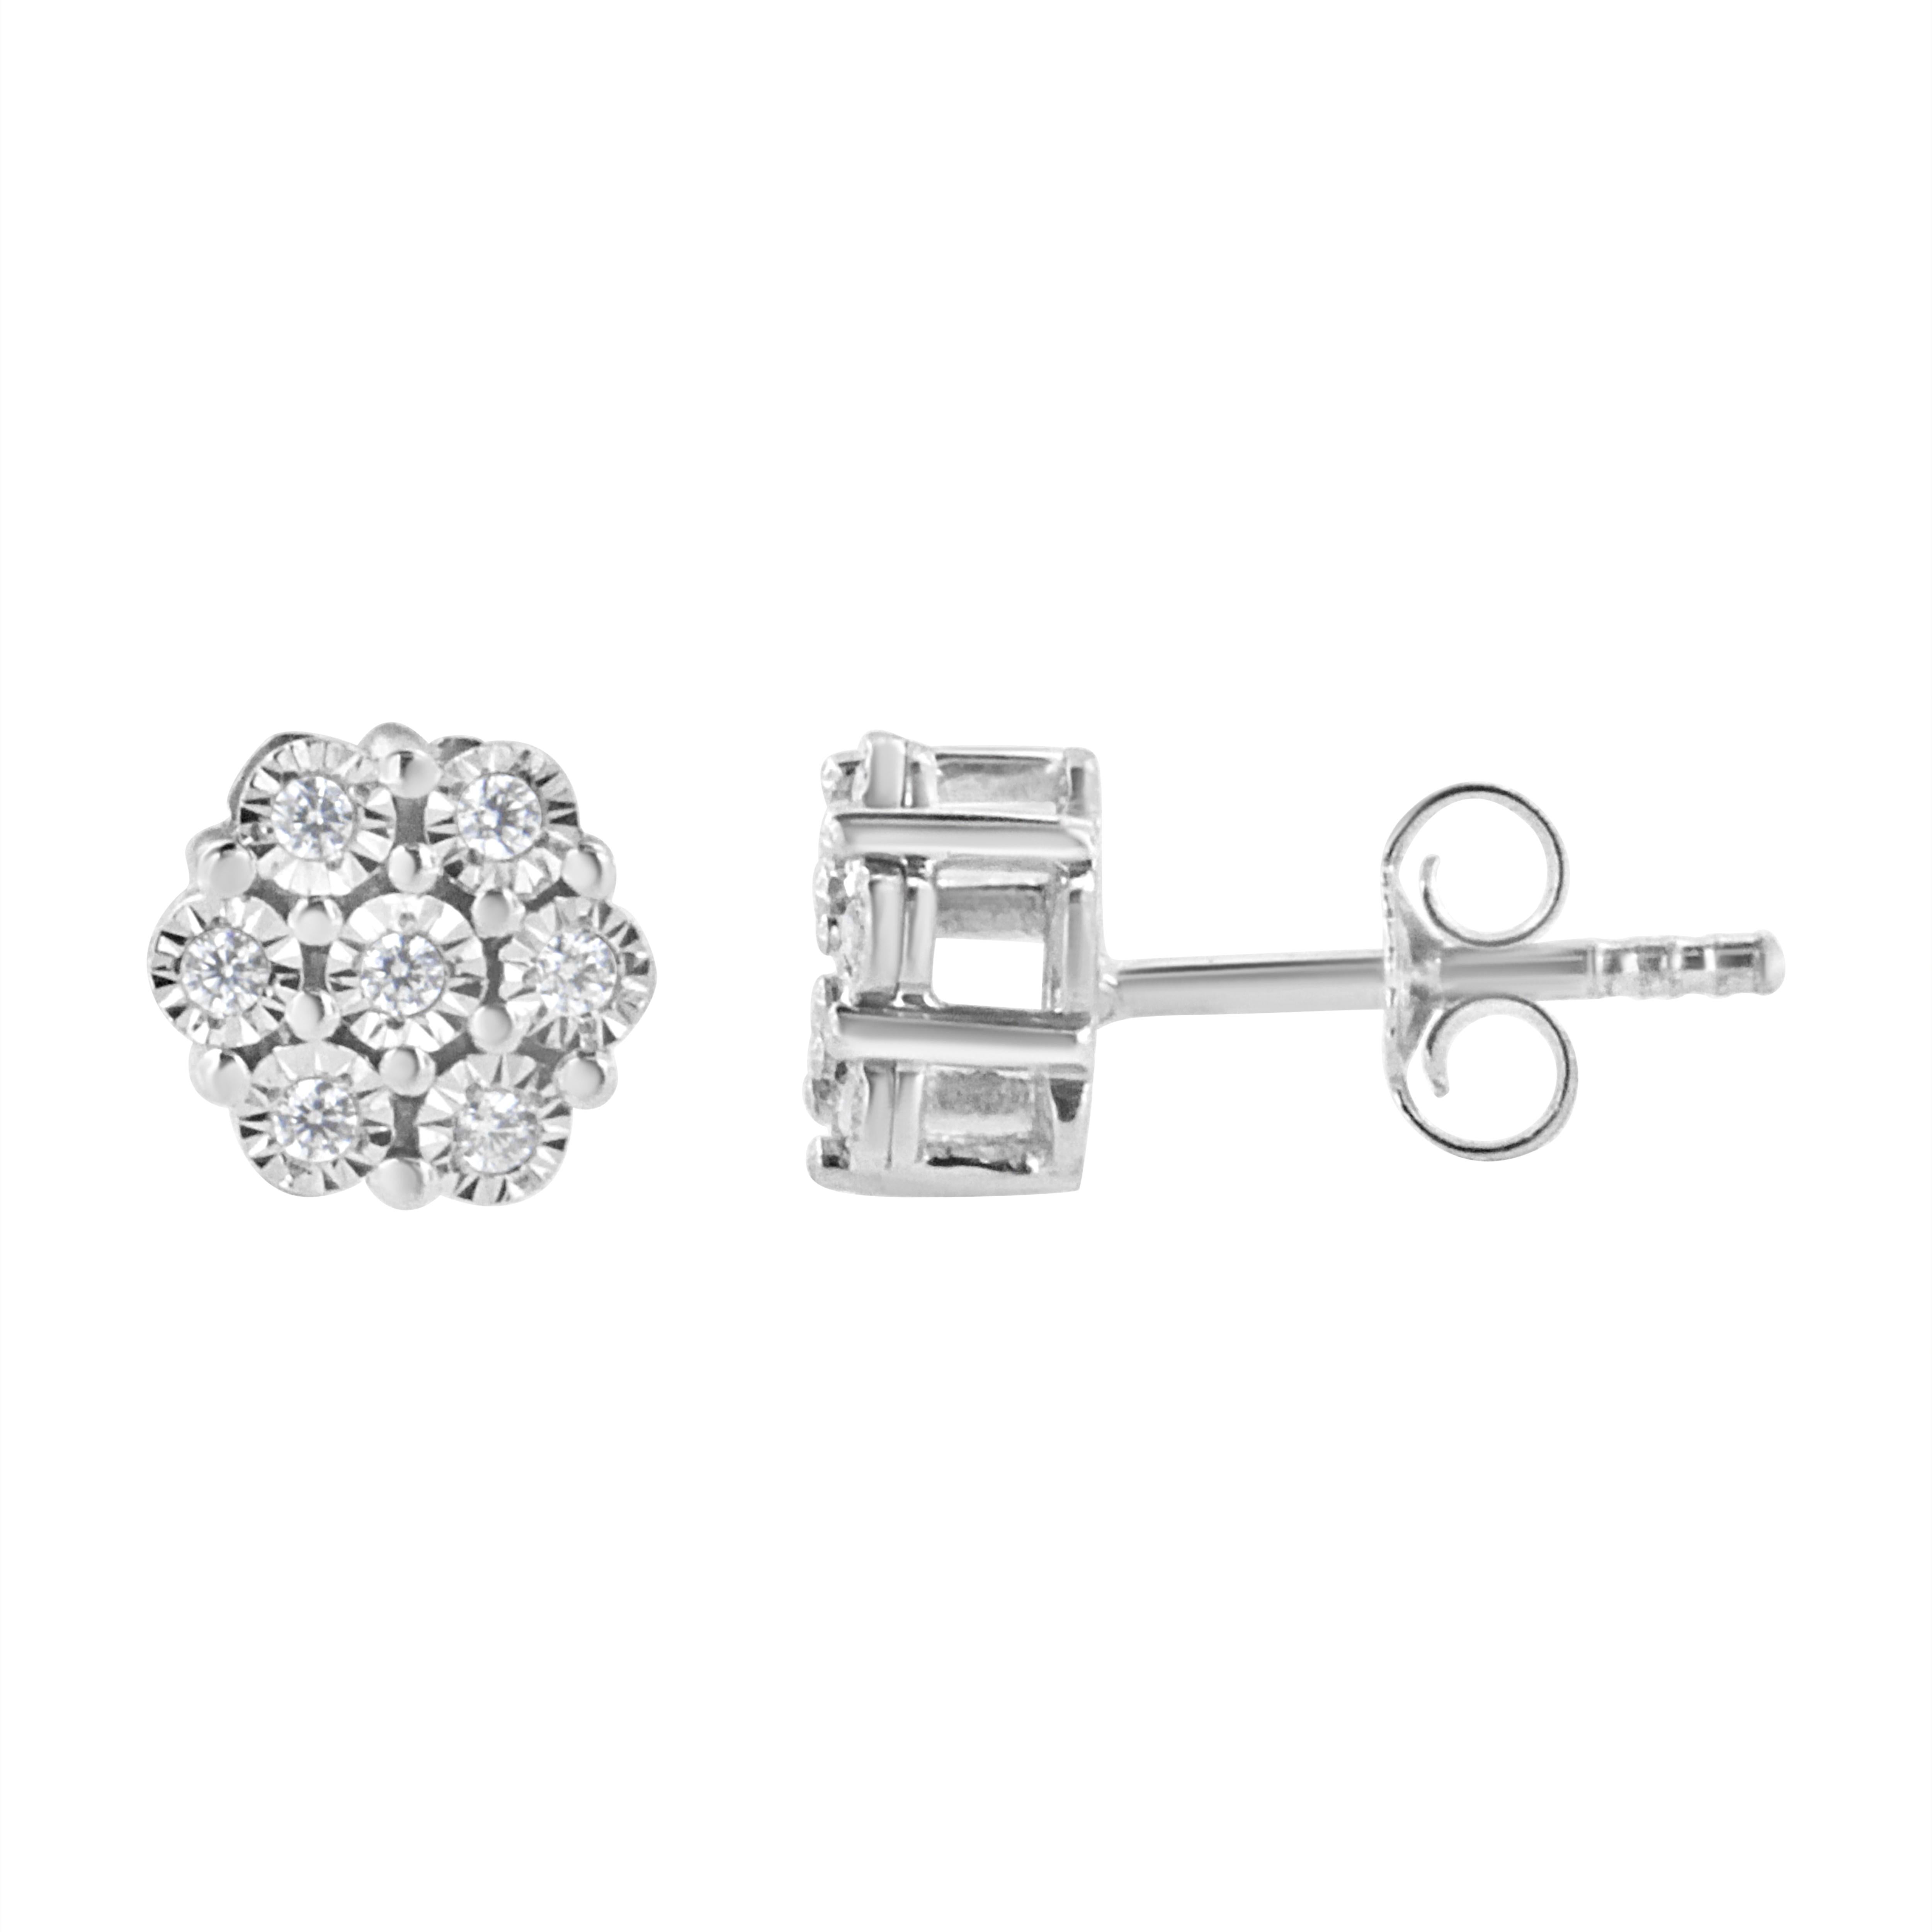 These flower accent stud earrings are embellished with diamonds in a miracle setting to make up a classic and elegant look. These beautiful stud earrings are made up of 14 rose-cut promo quality diamonds, which are the lowest on the diamond color